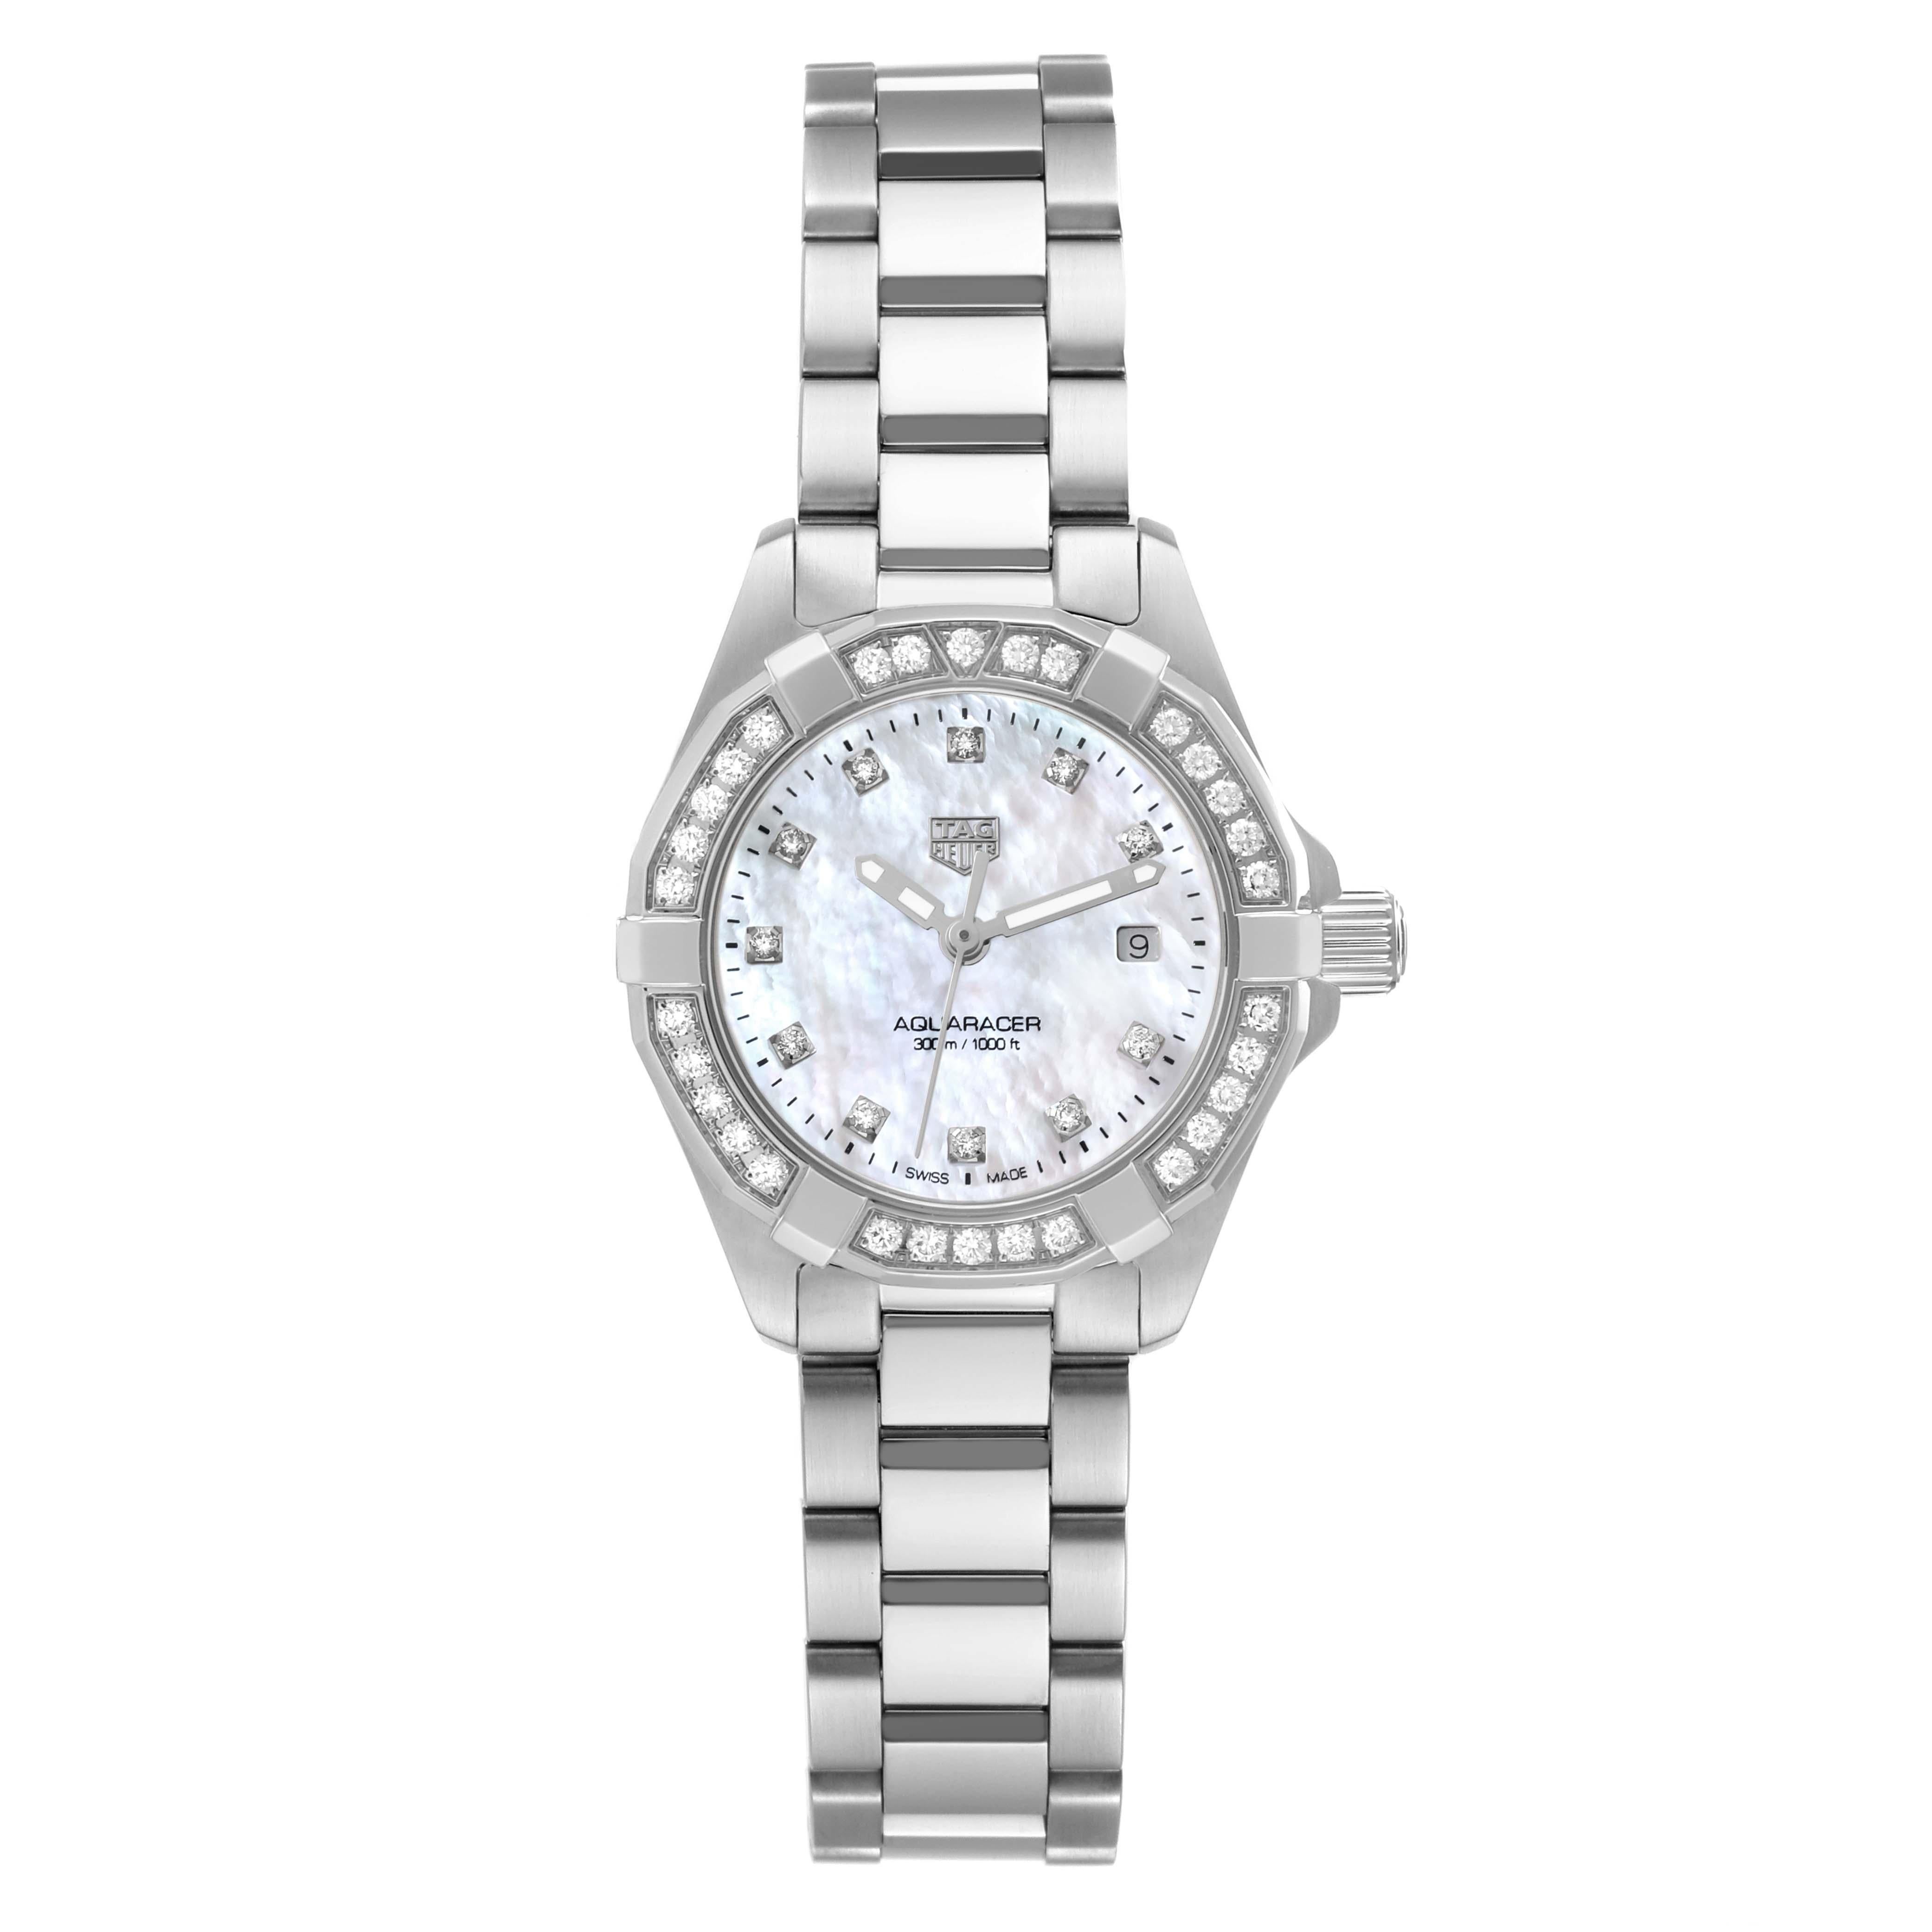 Tag Heuer Aquaracer Mother of Pearl Diamond Steel Ladies Watch WBD1415 Box Card. Quartz movement. Stainless steel case 27.0 mm in diameter. Unidirectional rotating original Tag Heuer factory diamond bezel. Scratch resistant sapphire crystal. Mother